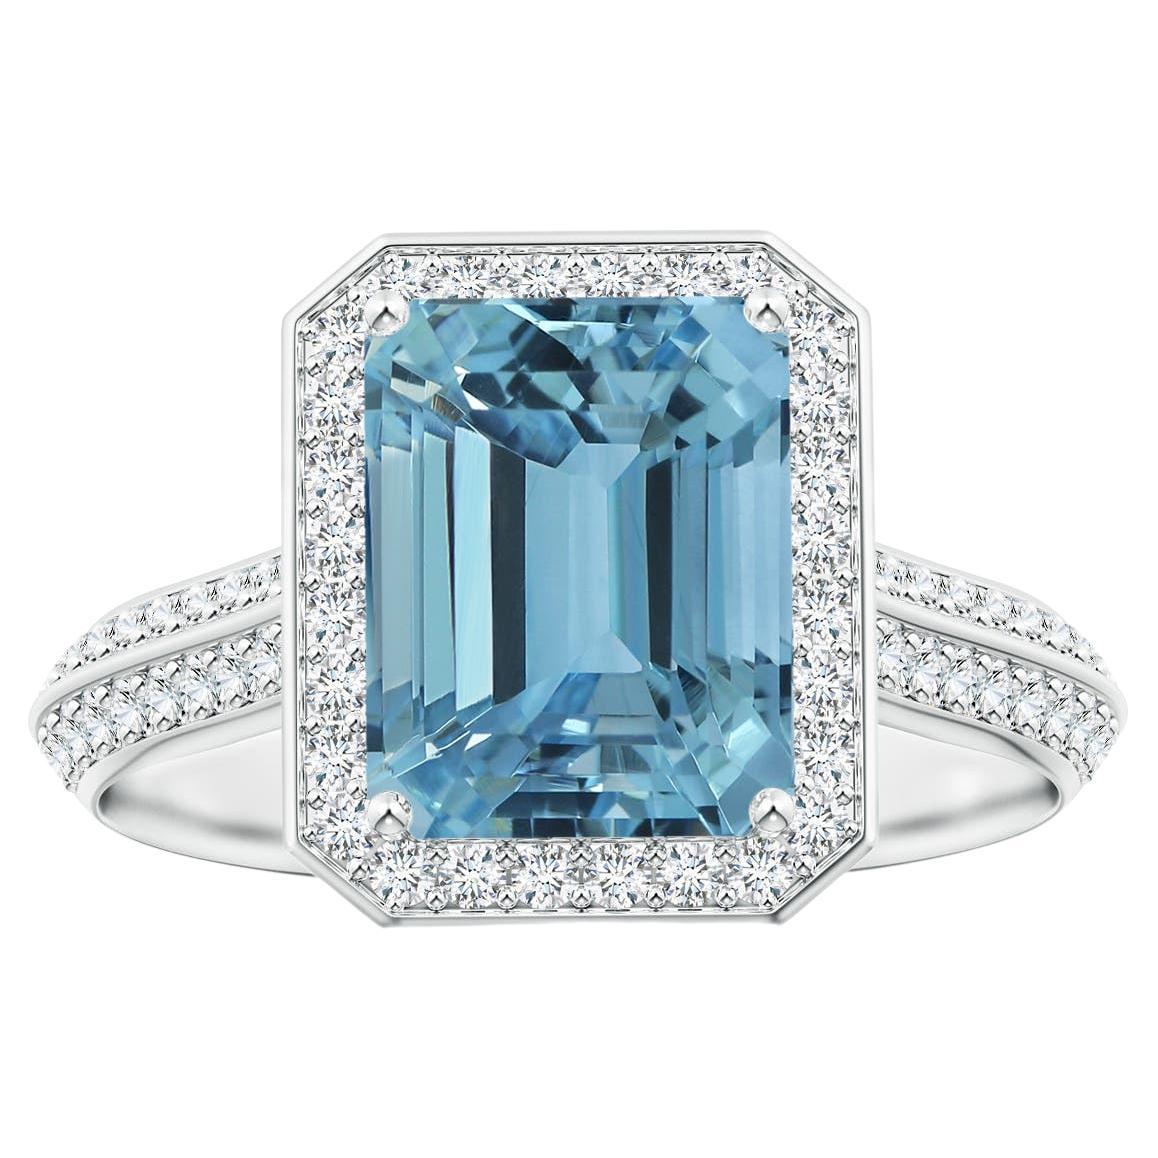 For Sale:  ANGARA GIA Certified Natural Emerald-Cut Aquamarine Halo Ring in White Gold